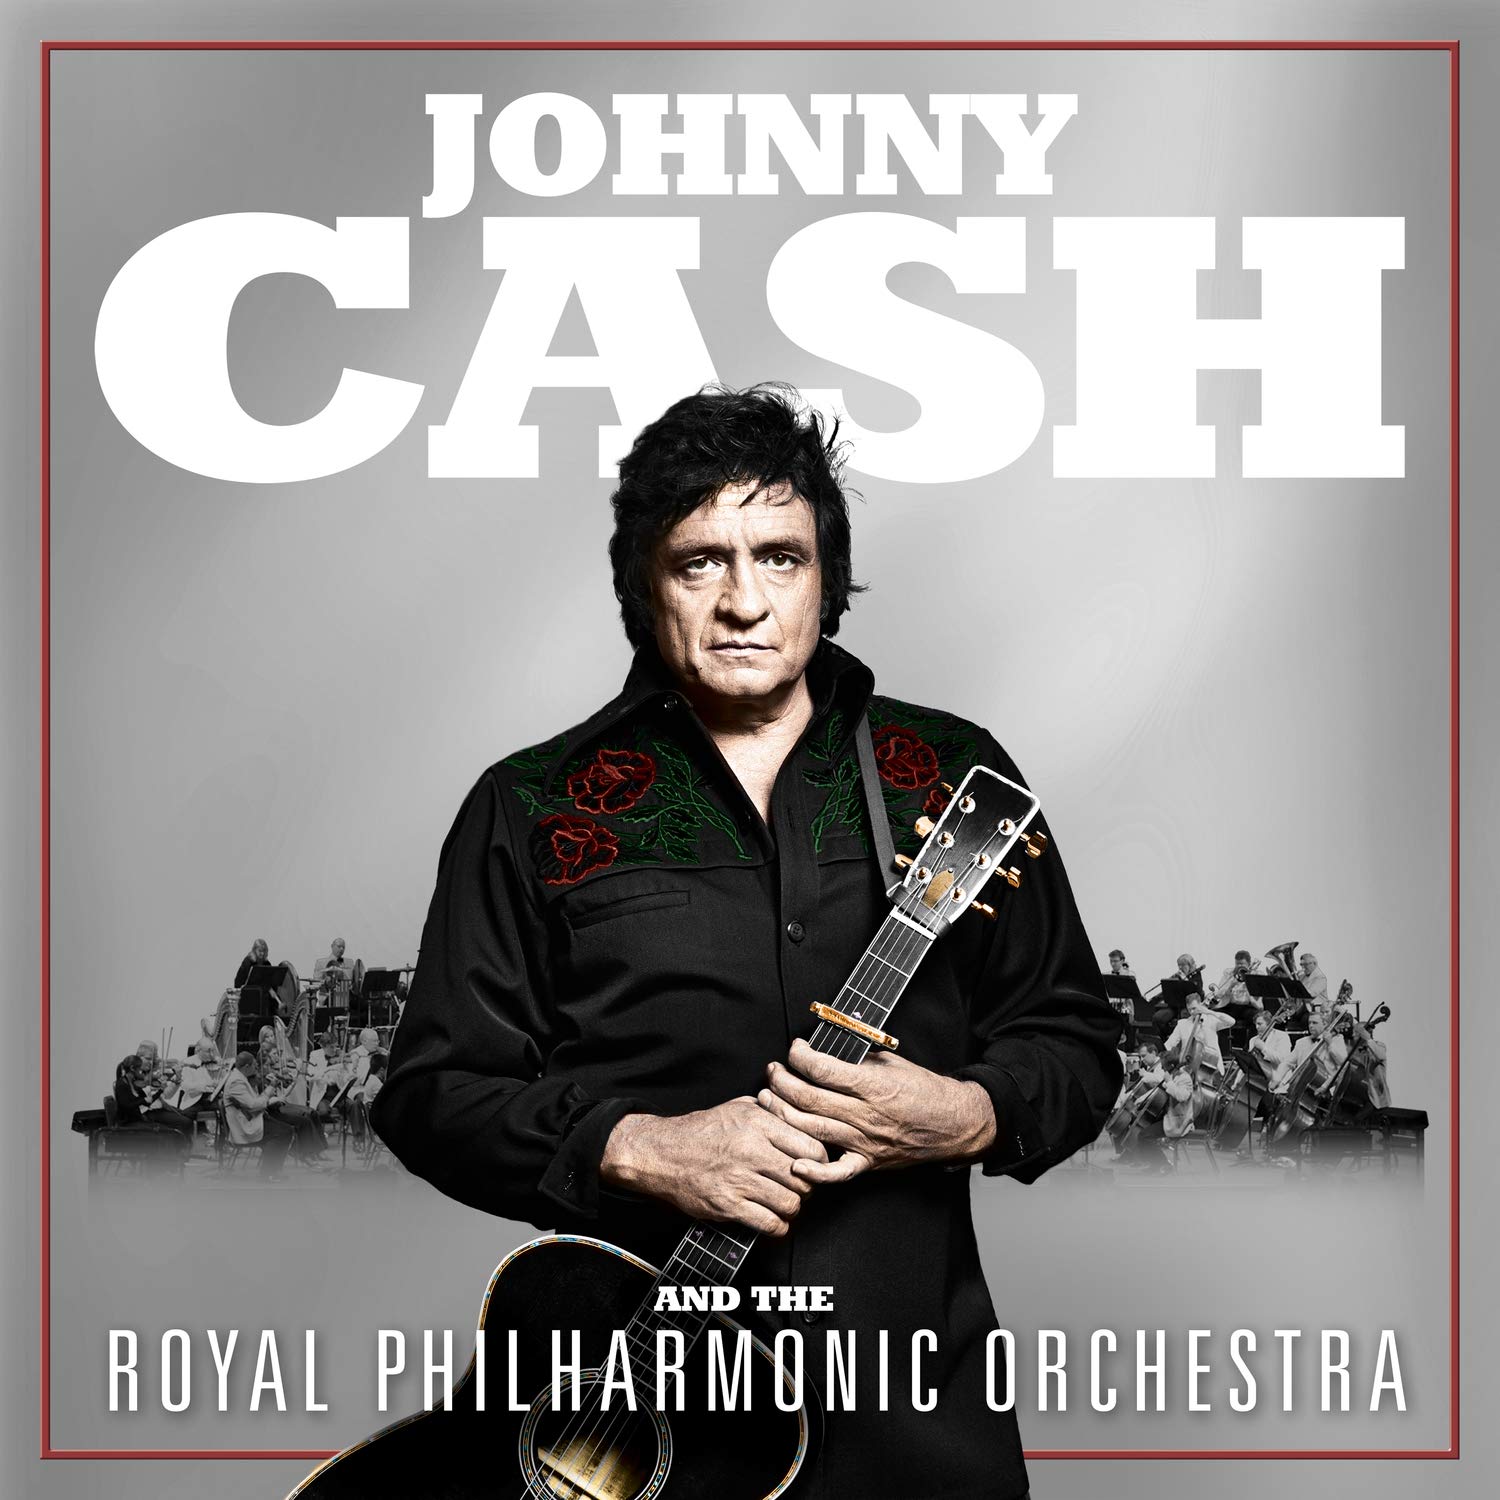 Johnny Cash (조니 캐시) - Johnny Cash And The Royal Philharmonic Orchestra [LP] 